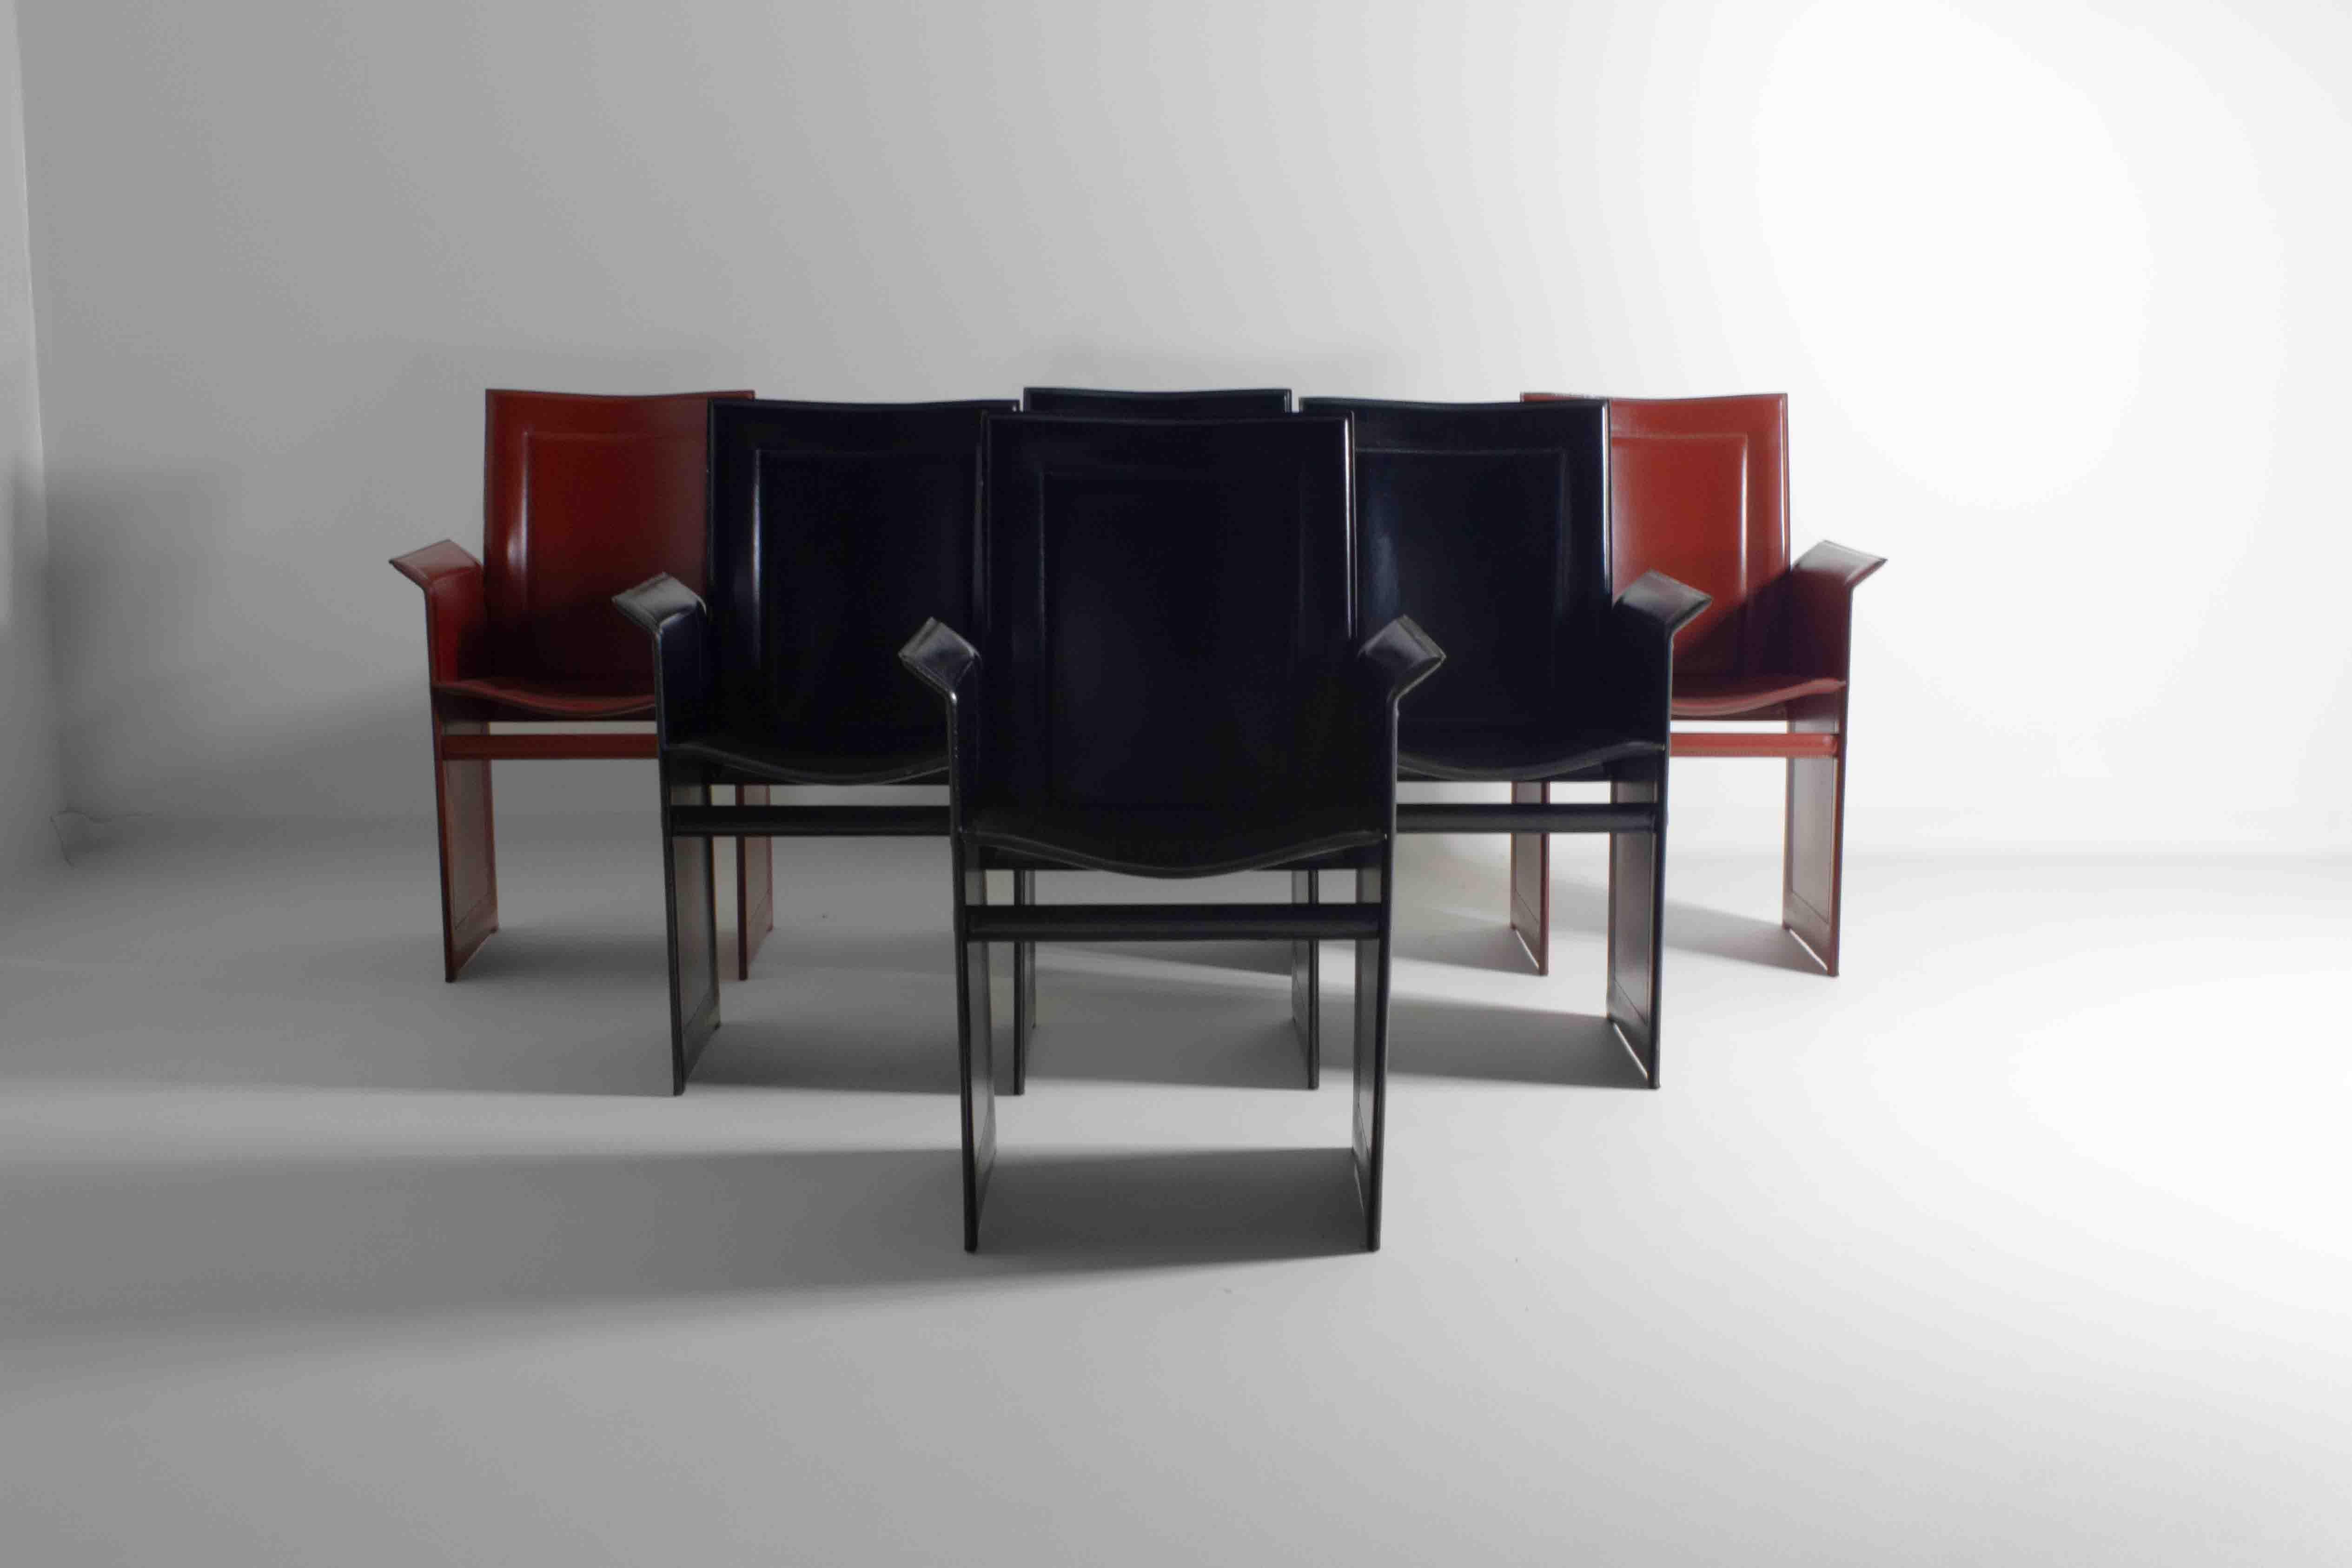 This set of six postmodern”Solaria” dining chairs from the 1980s by Arrben, Italy is a striking combination of bold geometry and luxury materials. The four black and two wine-red chairs are crafted from thick, high-quality leather, which gives them